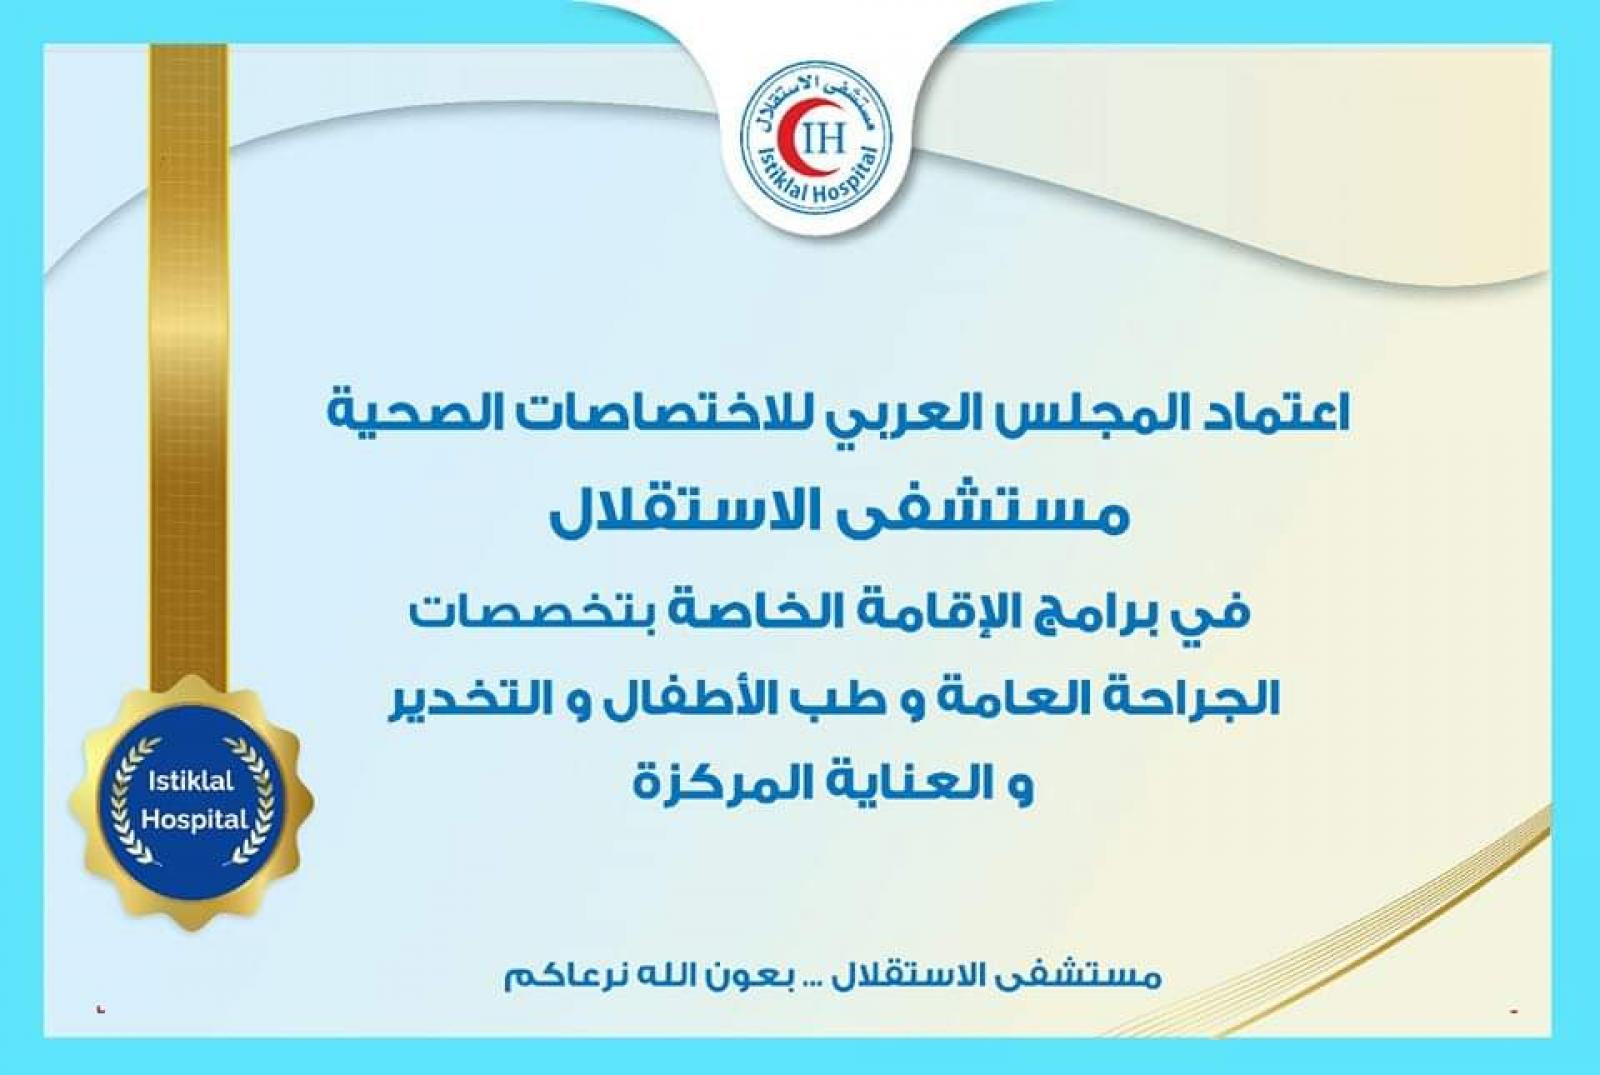 Accreditation of the Arab Council for Health Specializations